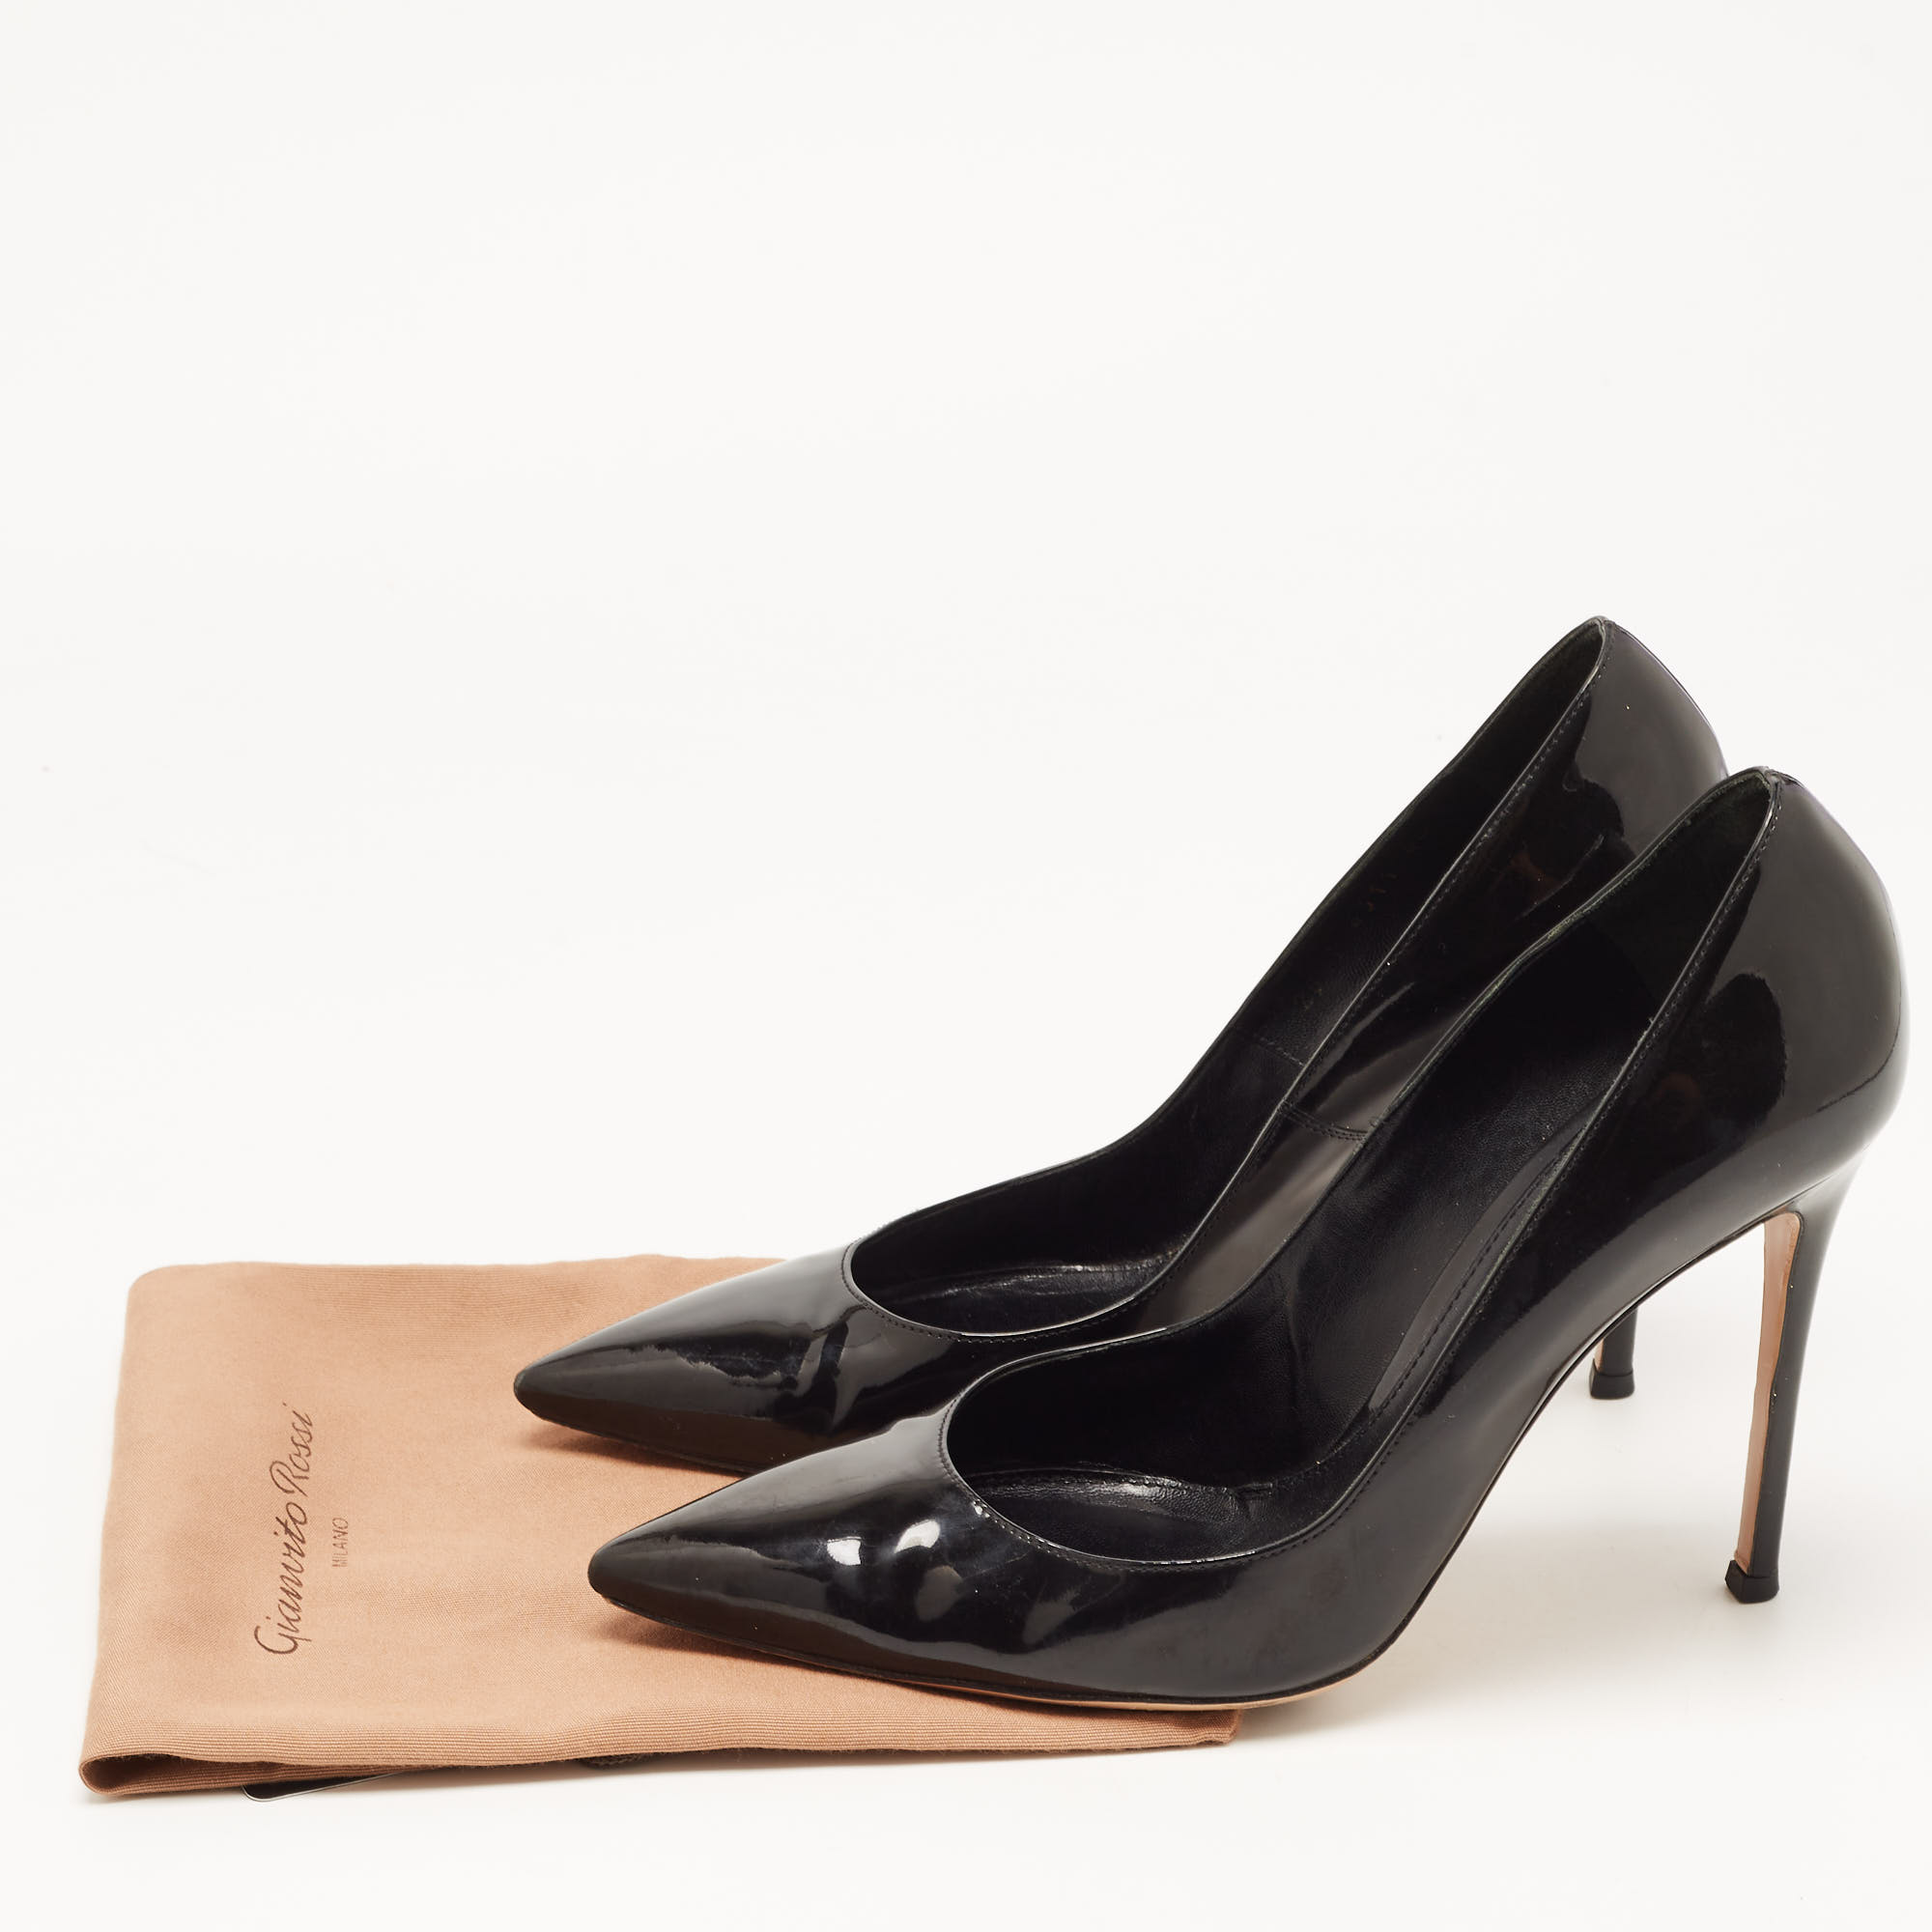 Gianvito Rossi Black Patent Leather Pointed Toe Pumps Size 40